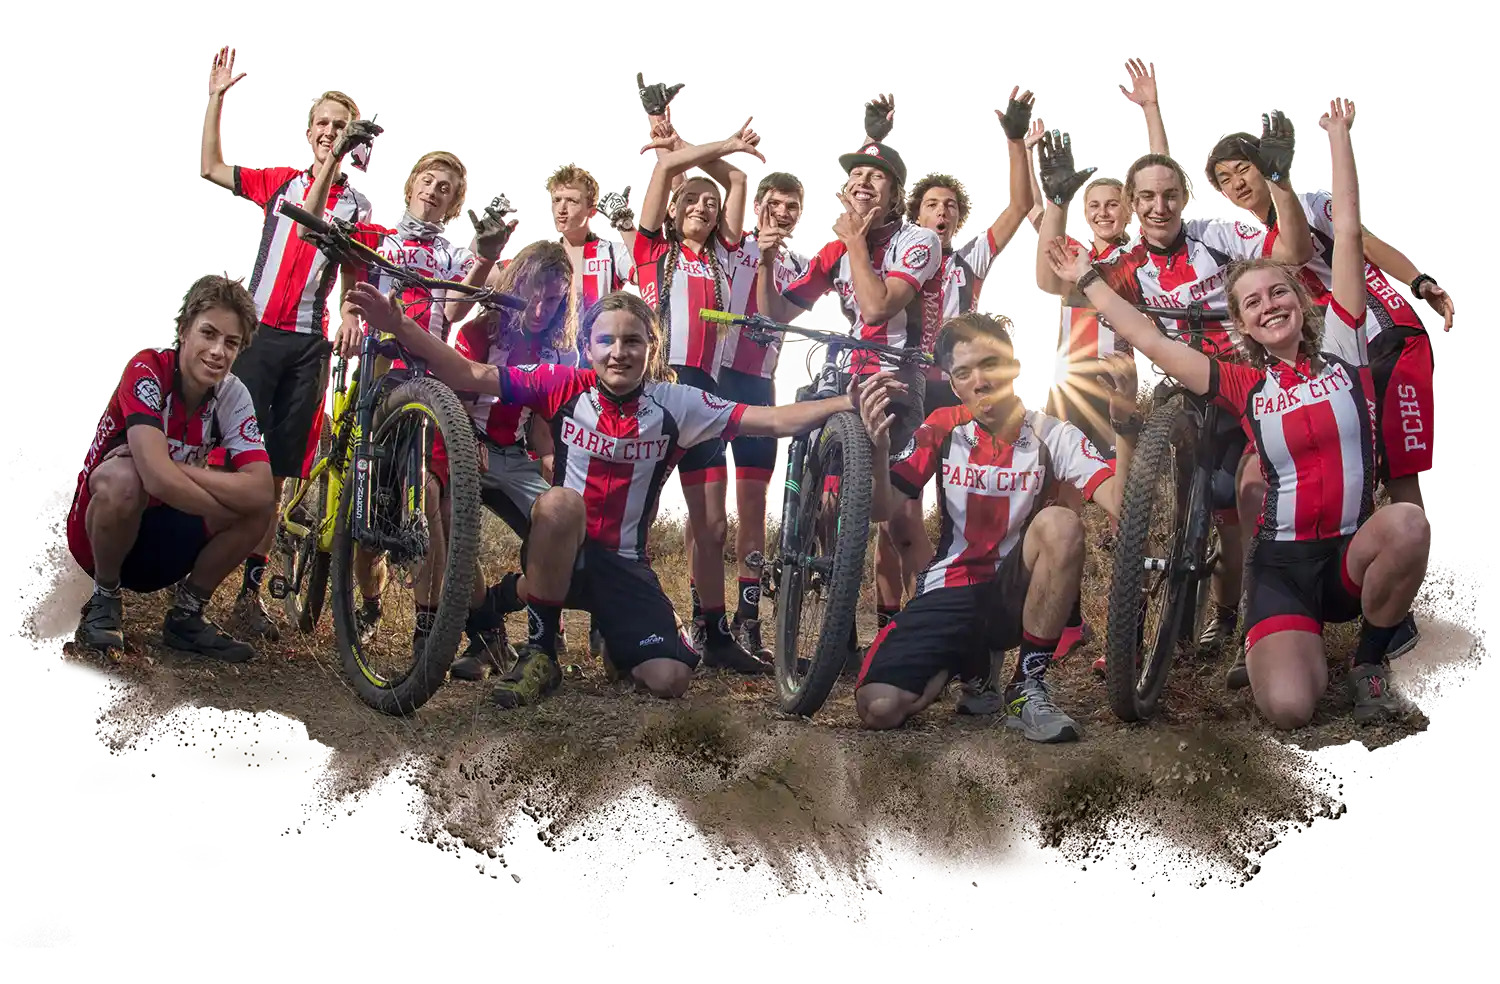 Mountain bikers posing and celebrating in a team photo.